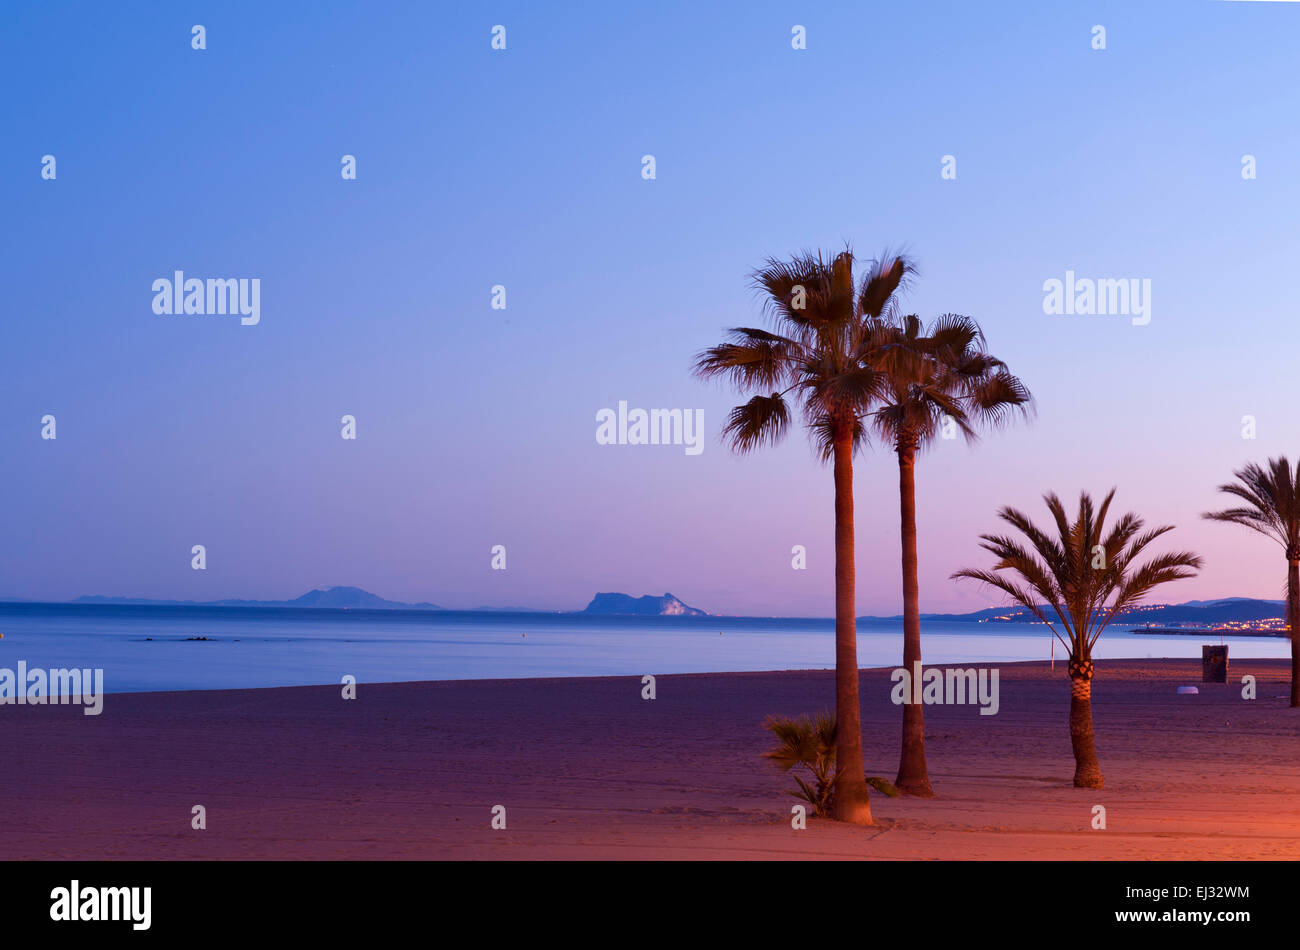 Estepona beach, La Rada, looking out to Gibraltar and Africa on The horizon. Costa del Sol, Malaga Province Spain. Three palms Stock Photo